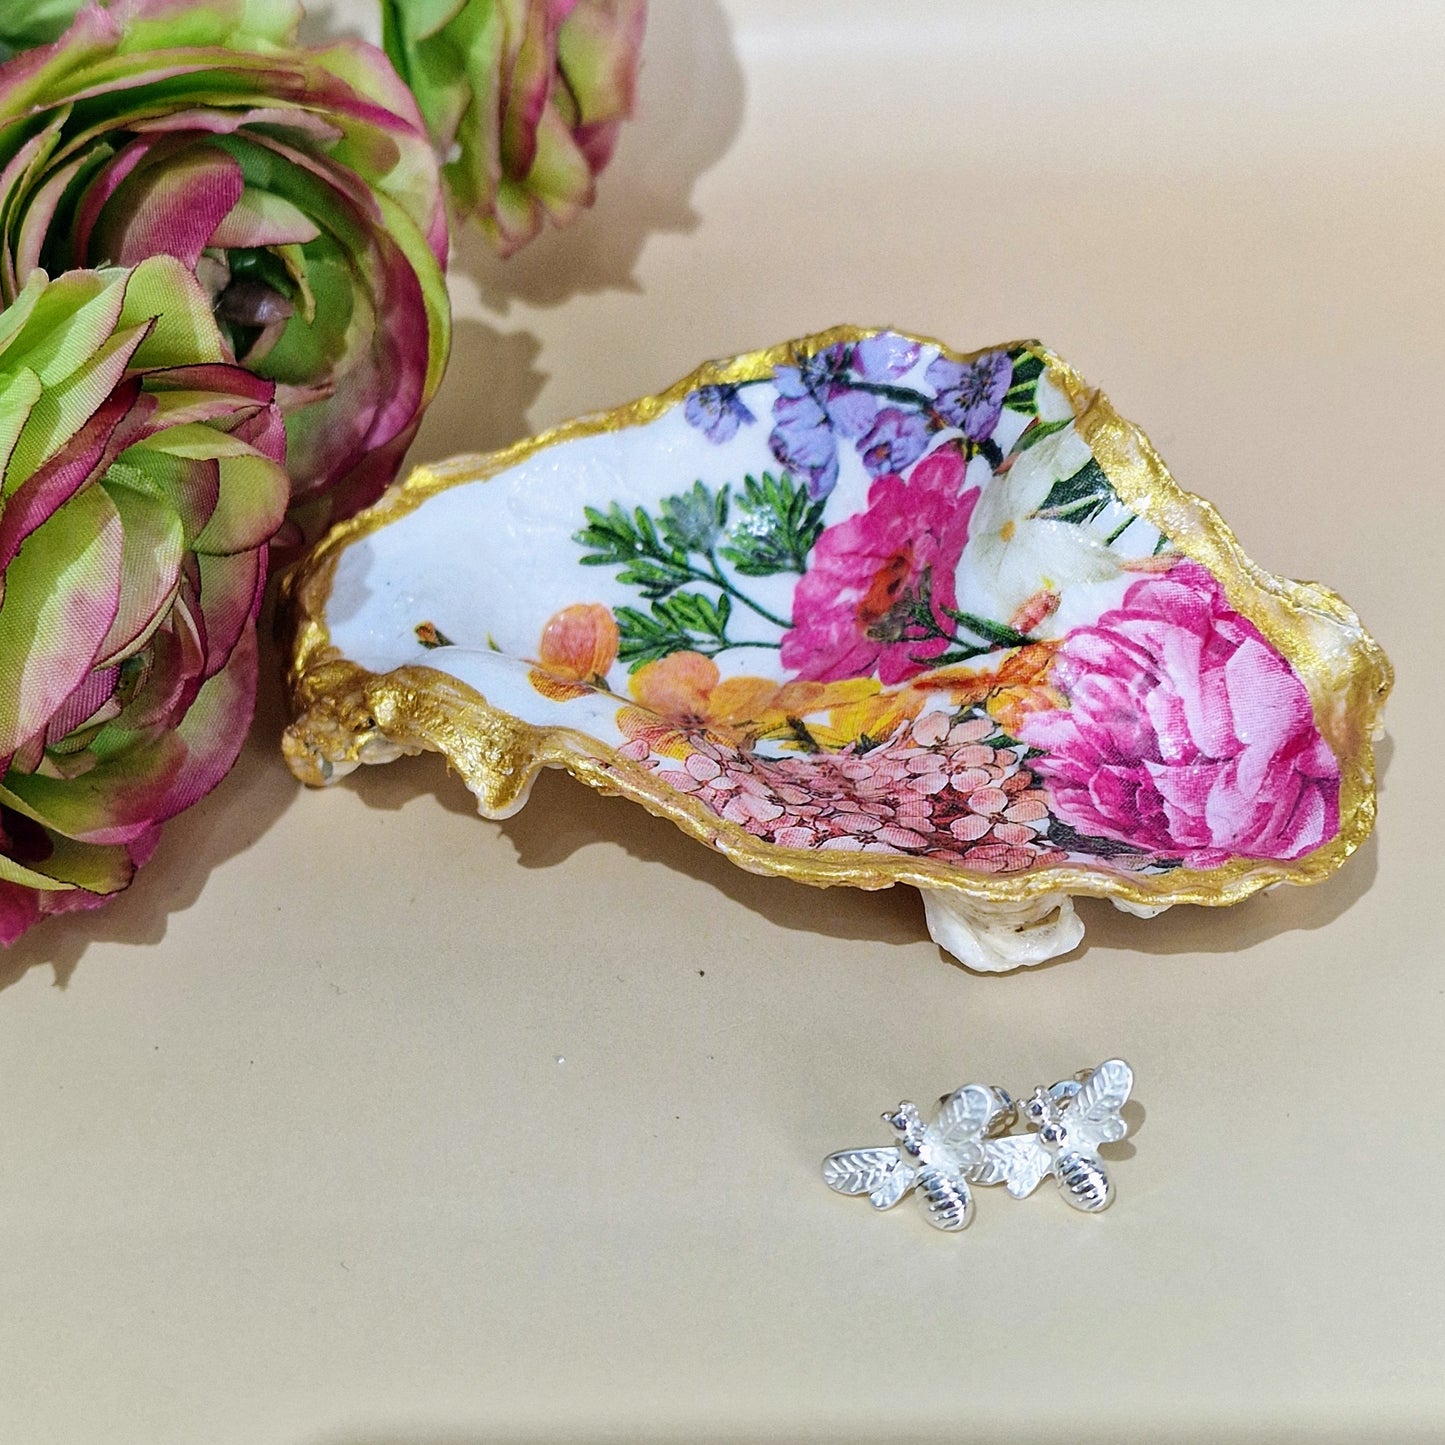 Spring Flowers Small Oyster Shell Trinket Dish